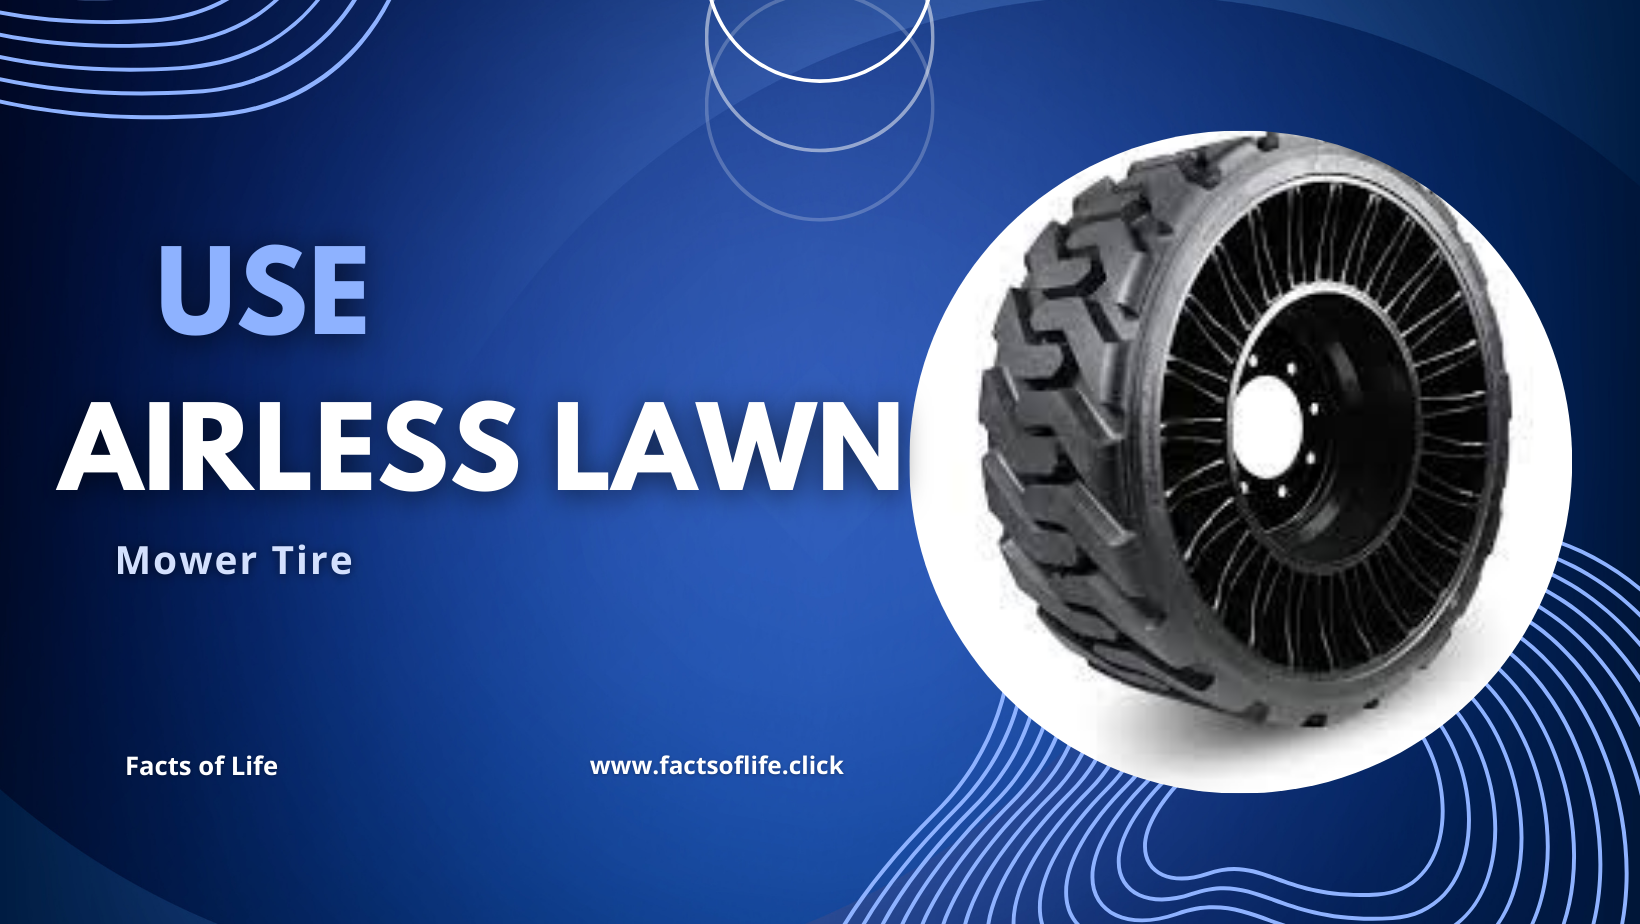 Why Should I Use Airless Lawn Mower Tires?